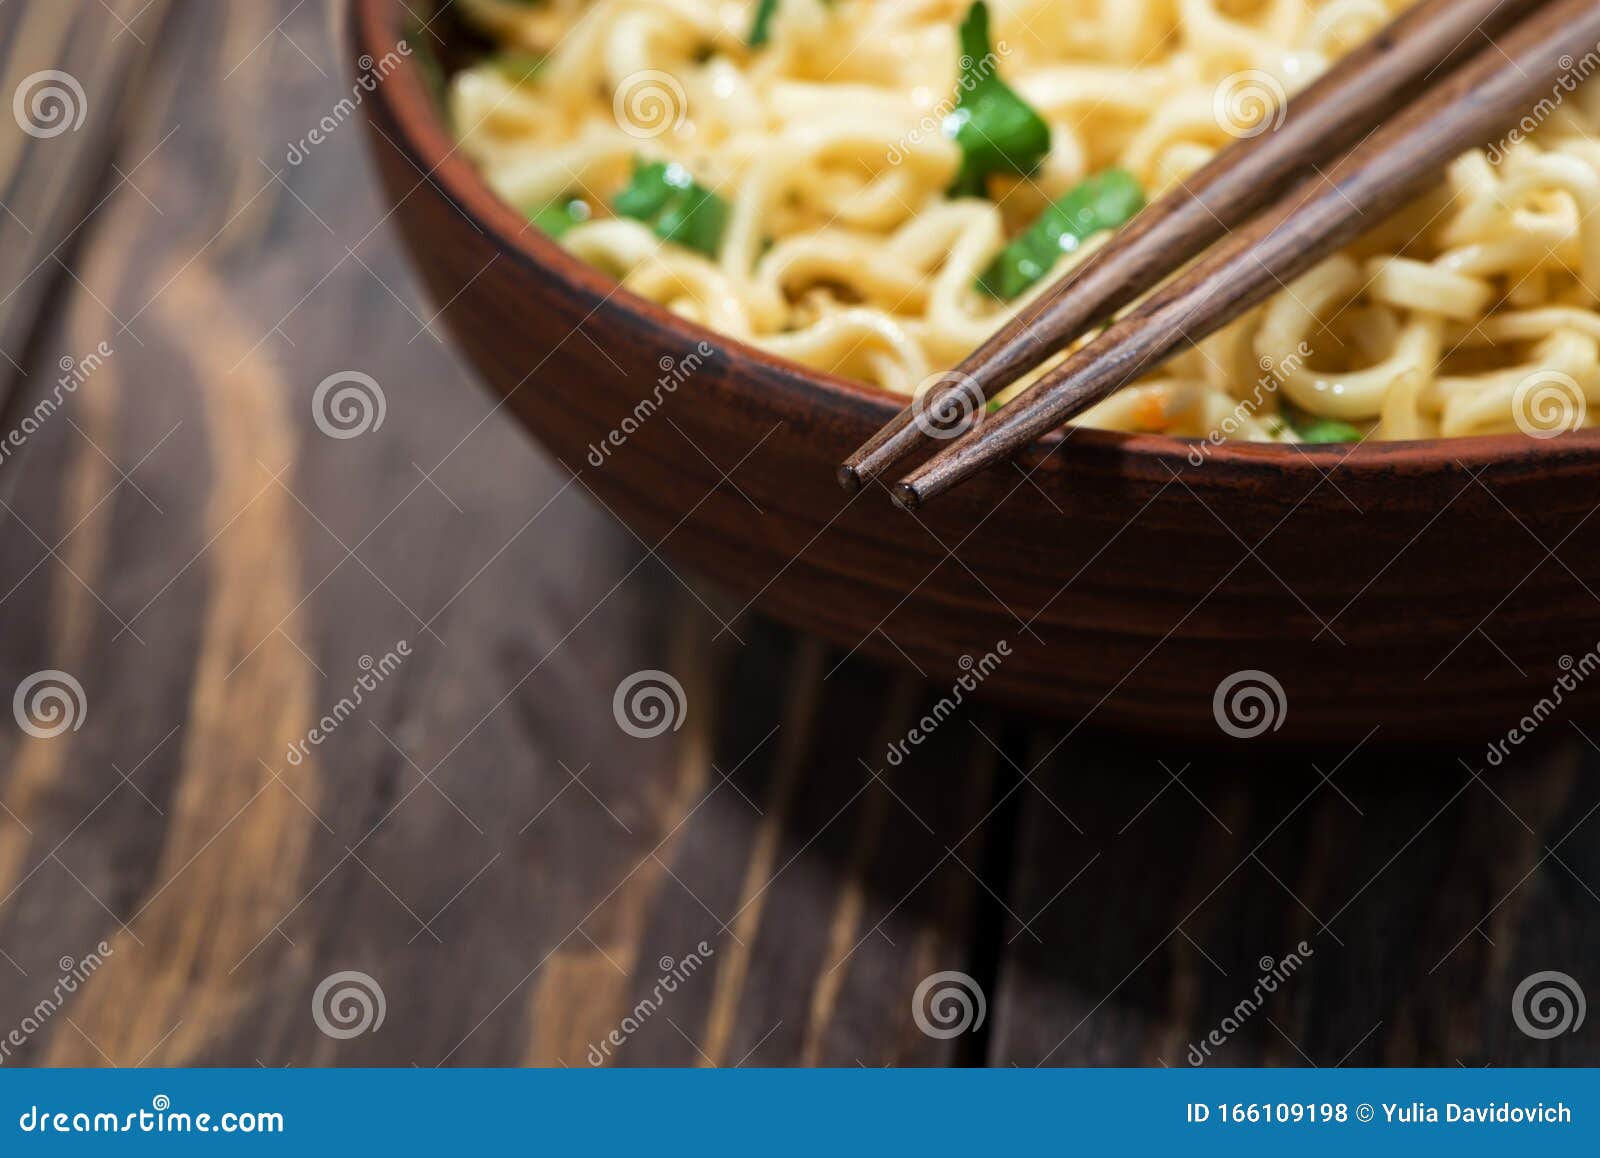 Traditional Chinese Noodles And Chopsticks, Selective Focus Stock Photo - Image of nutrition ...